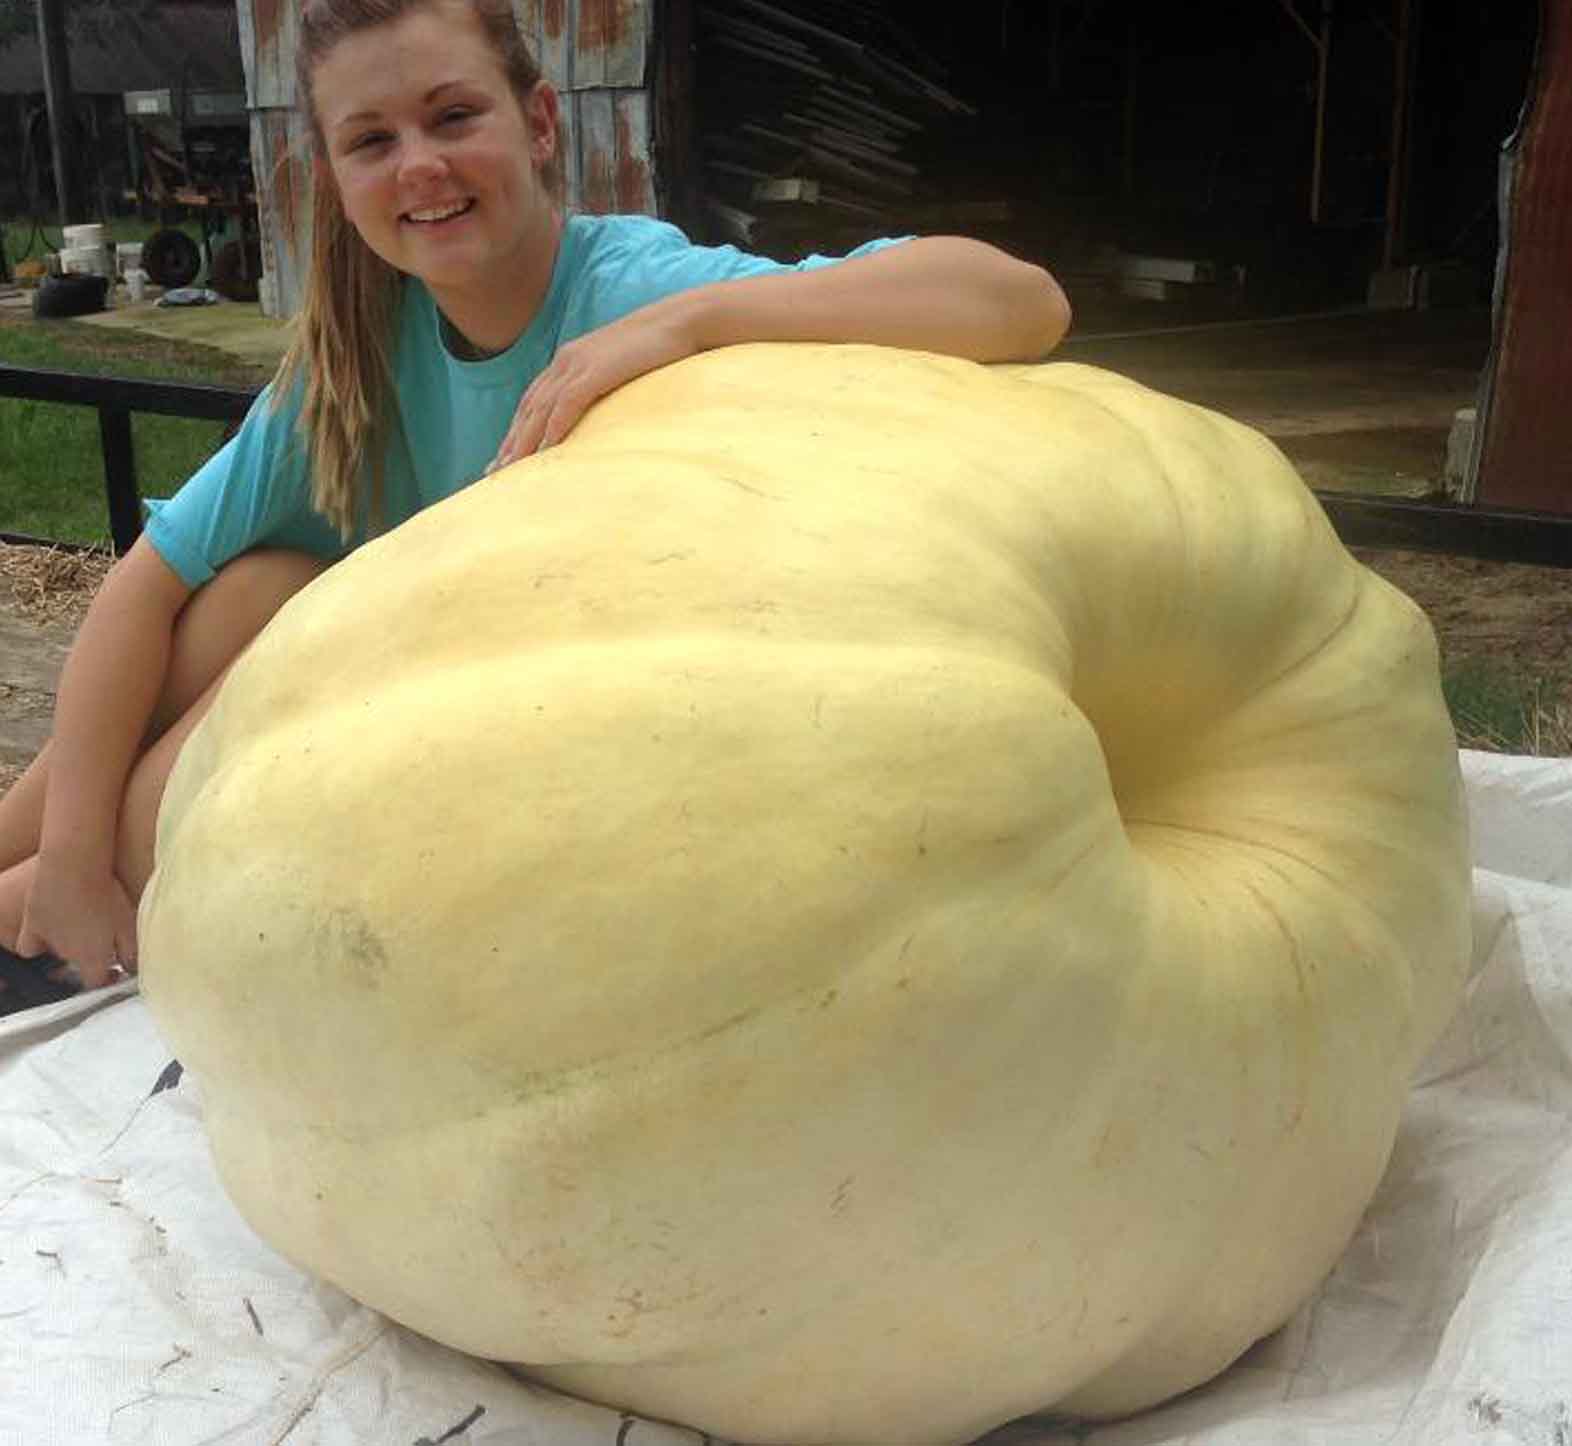 For the second year in row Caroline Daniel, of Terrell County 4-H, has won first place in Georgia 4-H's annual pumpkin contest with a 350-pound behemoth of an Atlantic Giant pumpkin. In 2014, Daniel also came in first with a 430-pound pumpkin.